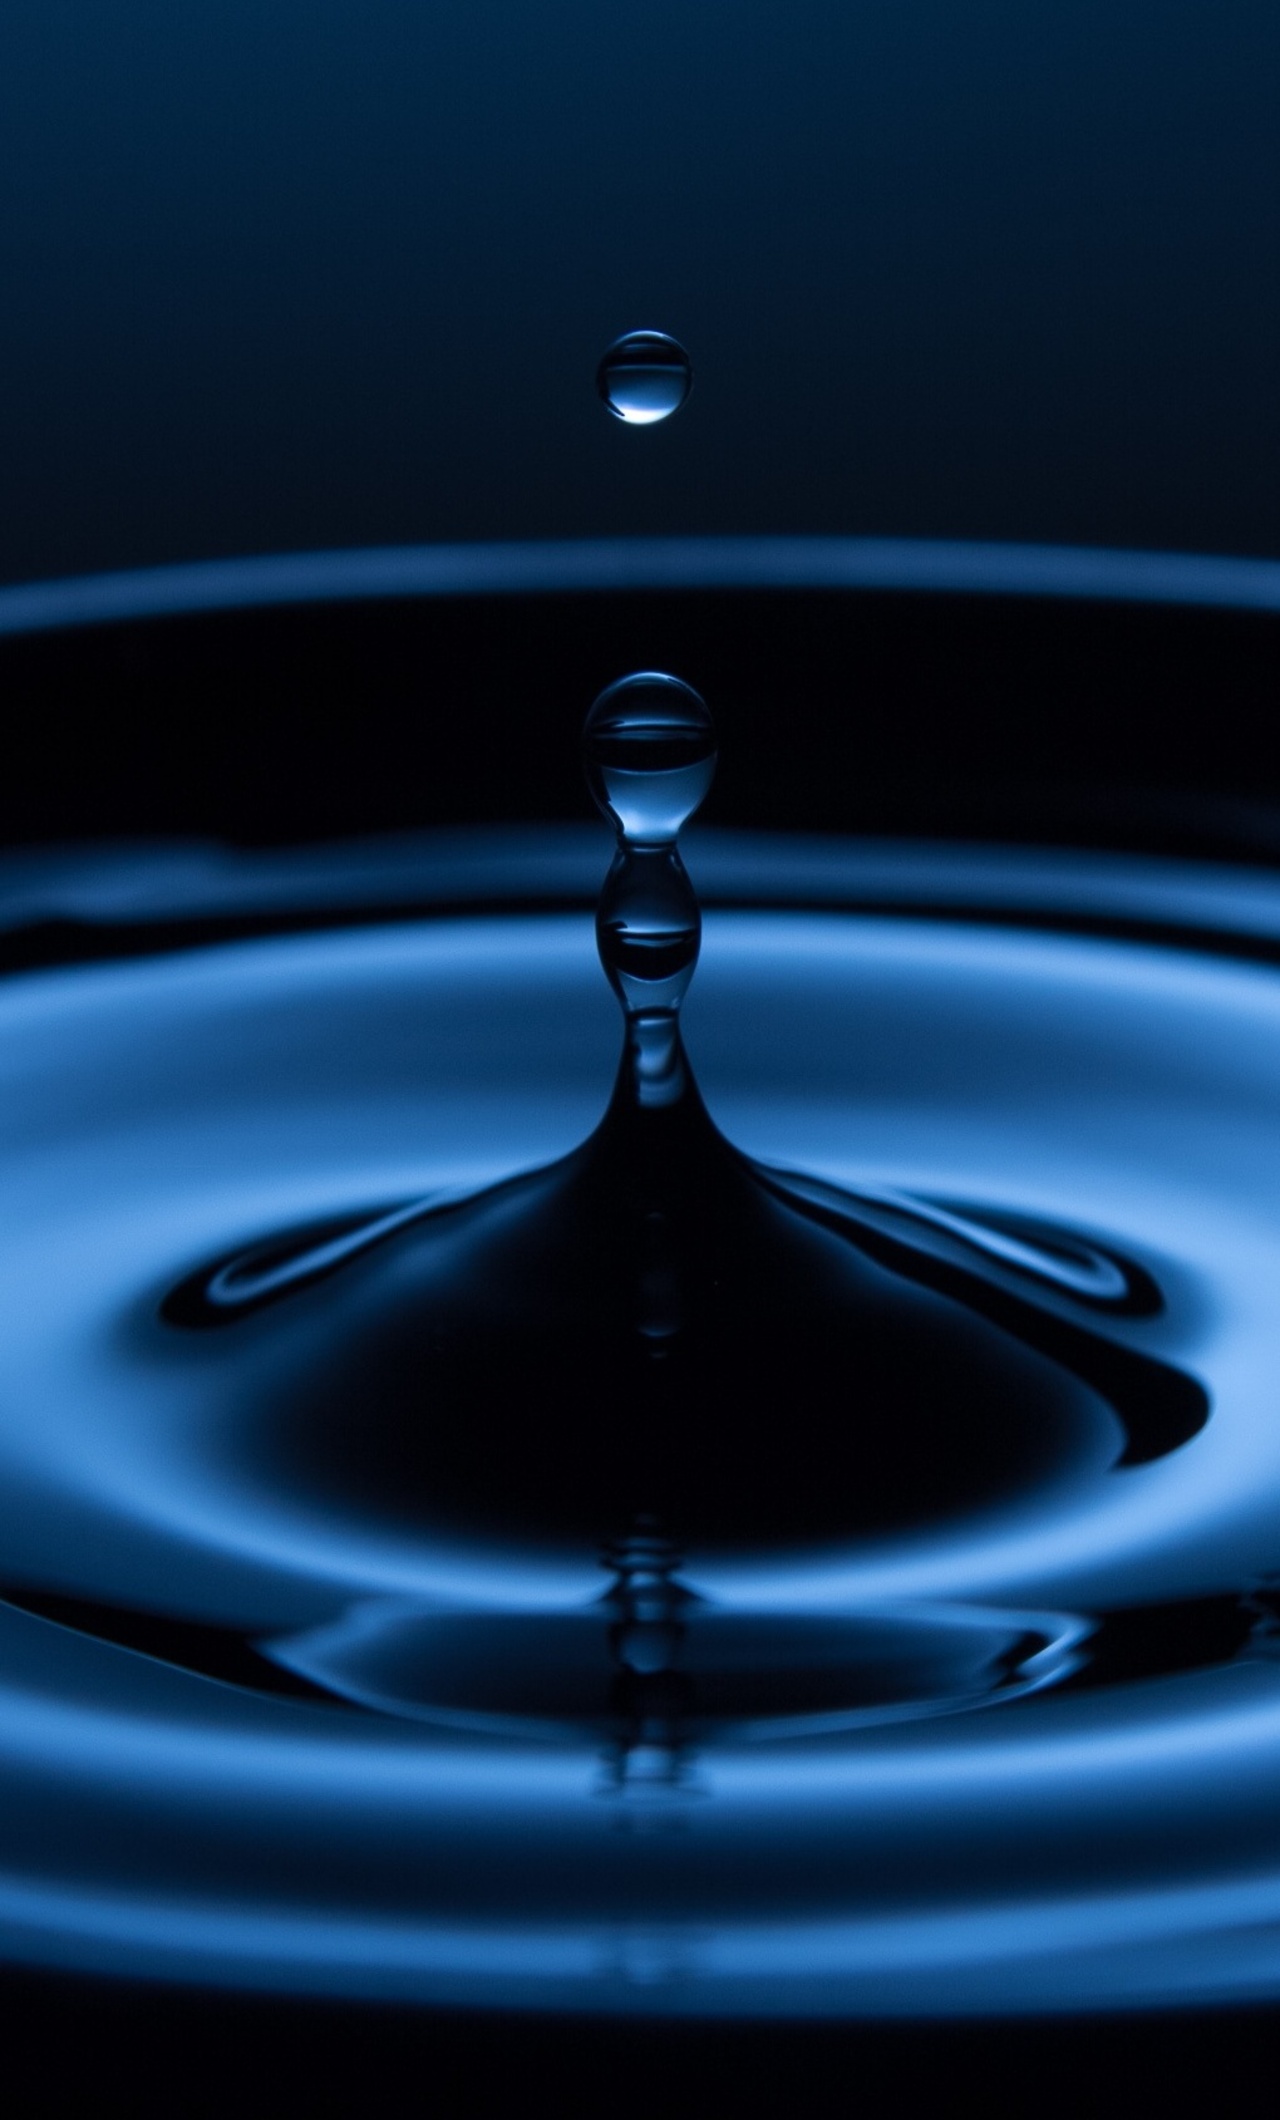 X water drop iphone hd k wallpapers images backgrounds photos and pictures